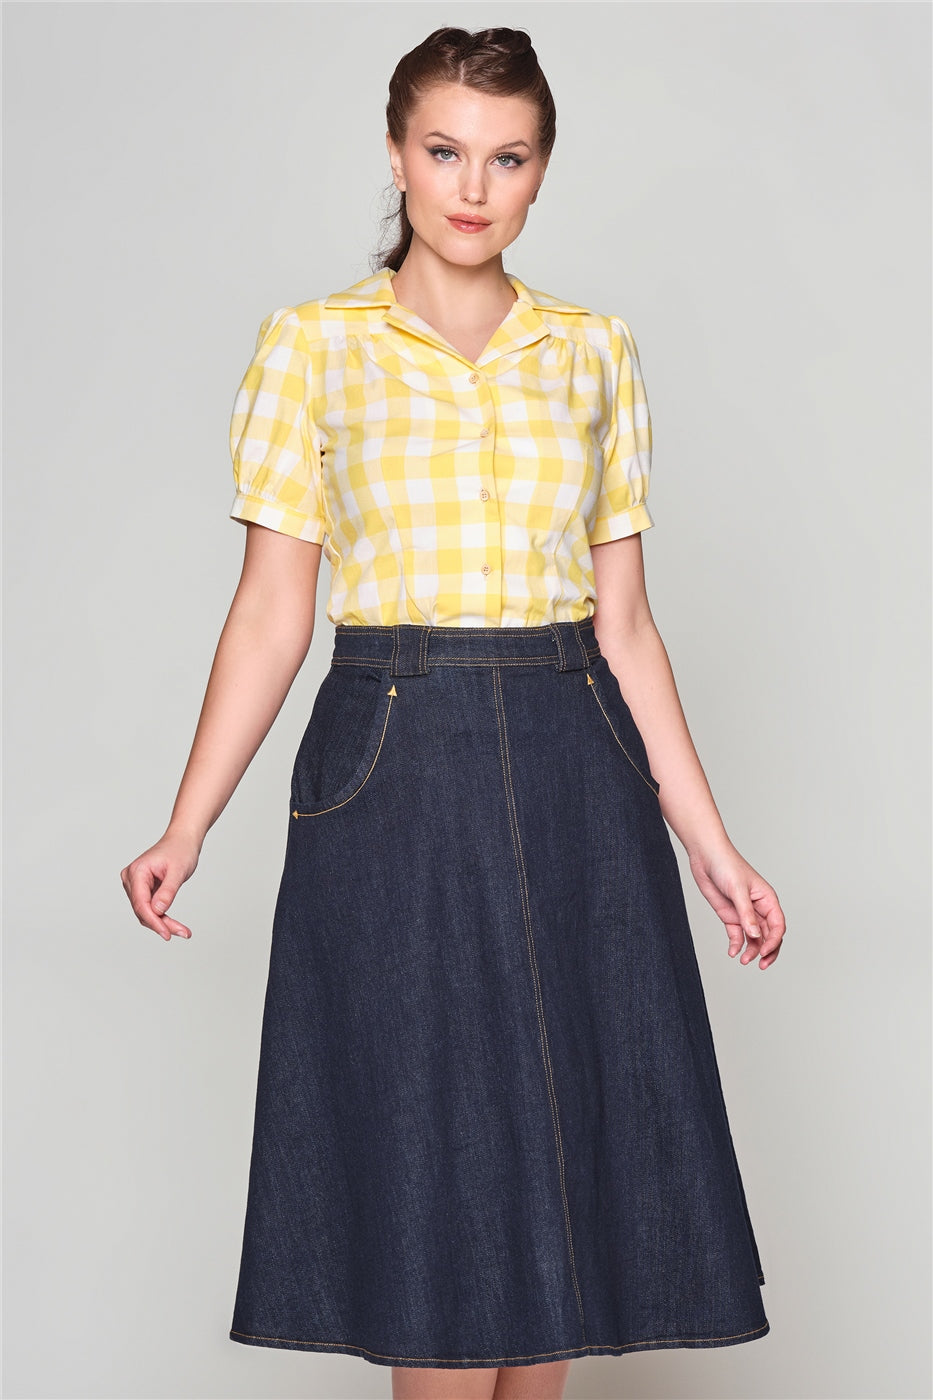 Young woman with a ponytail standing with her arms by her sides wearing the Luana yellow gingham blouse and a denim mid length A-line skirt.